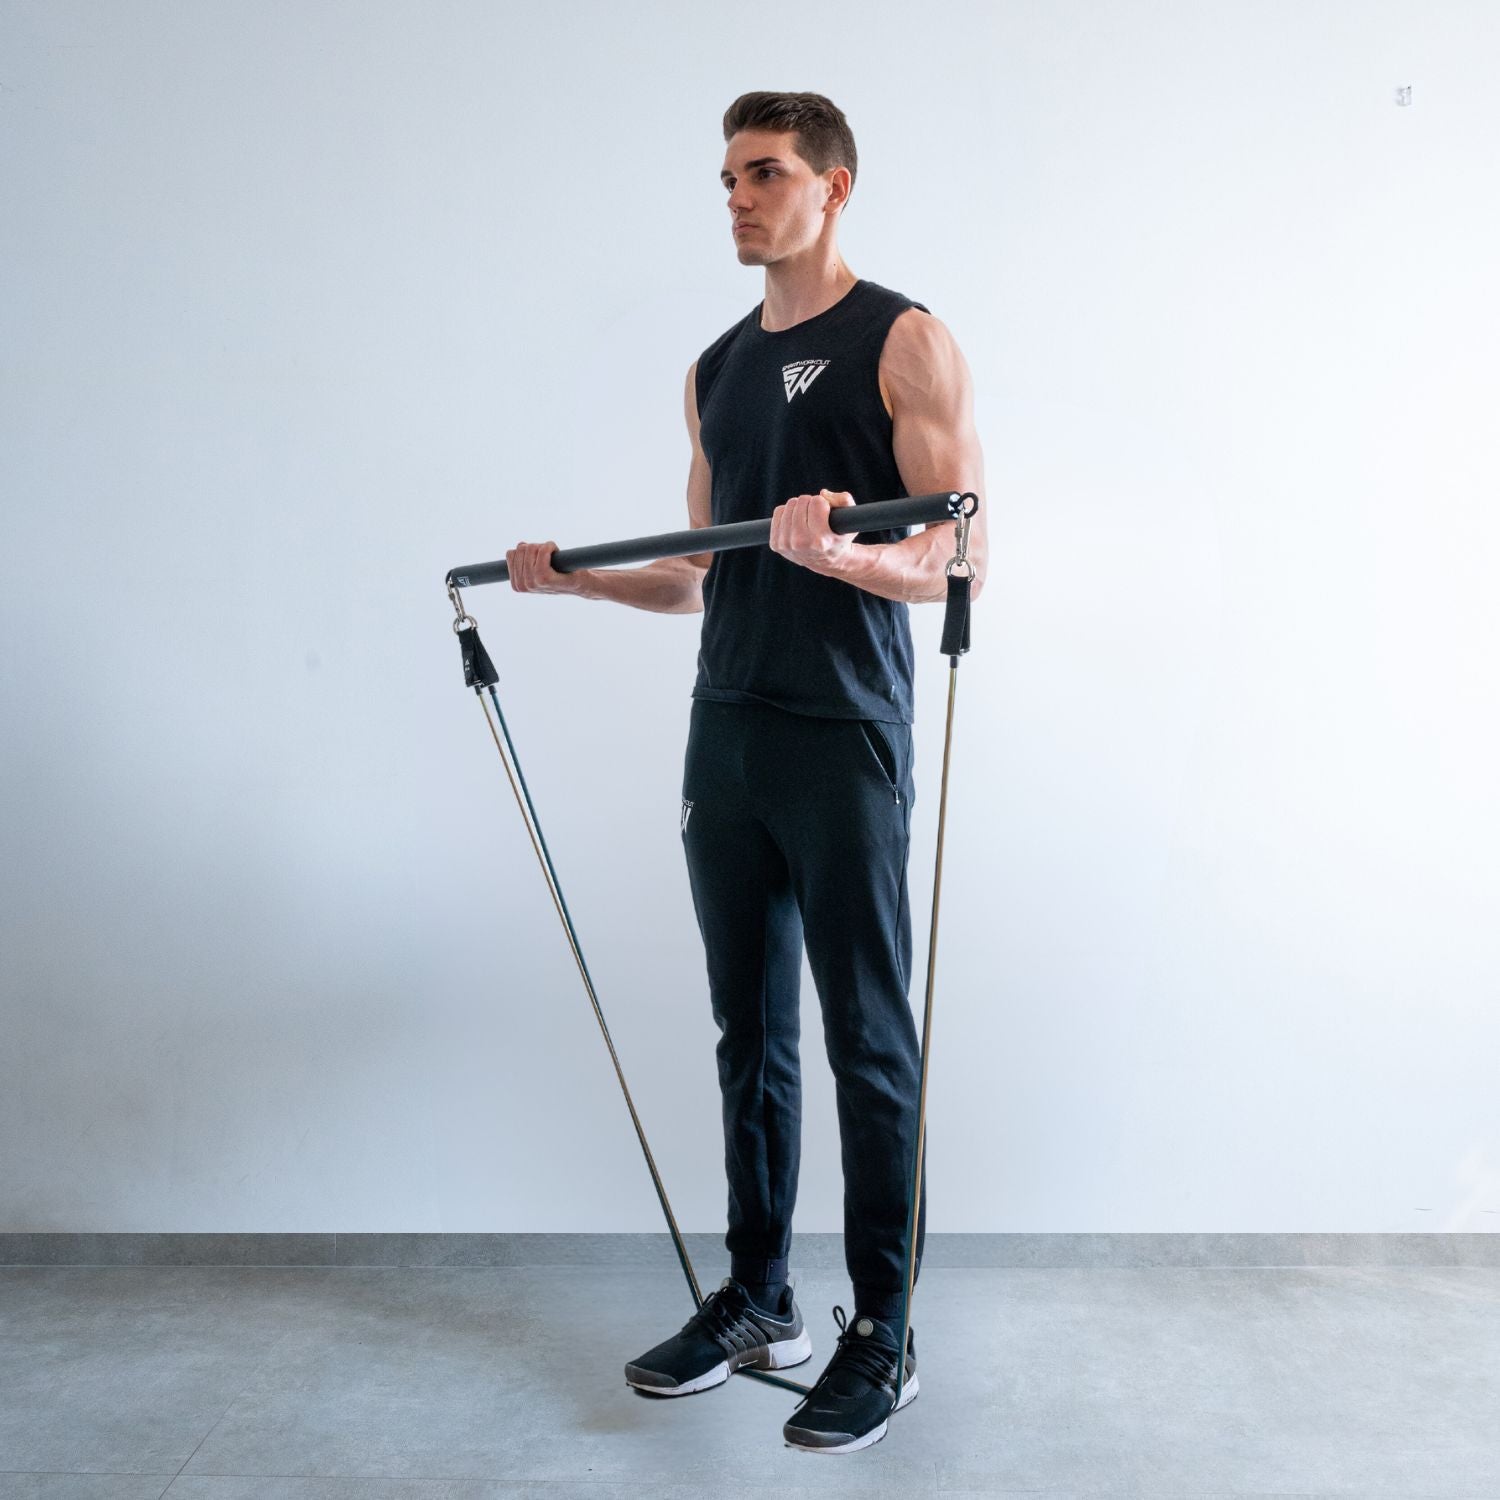 Resistance bands exercises